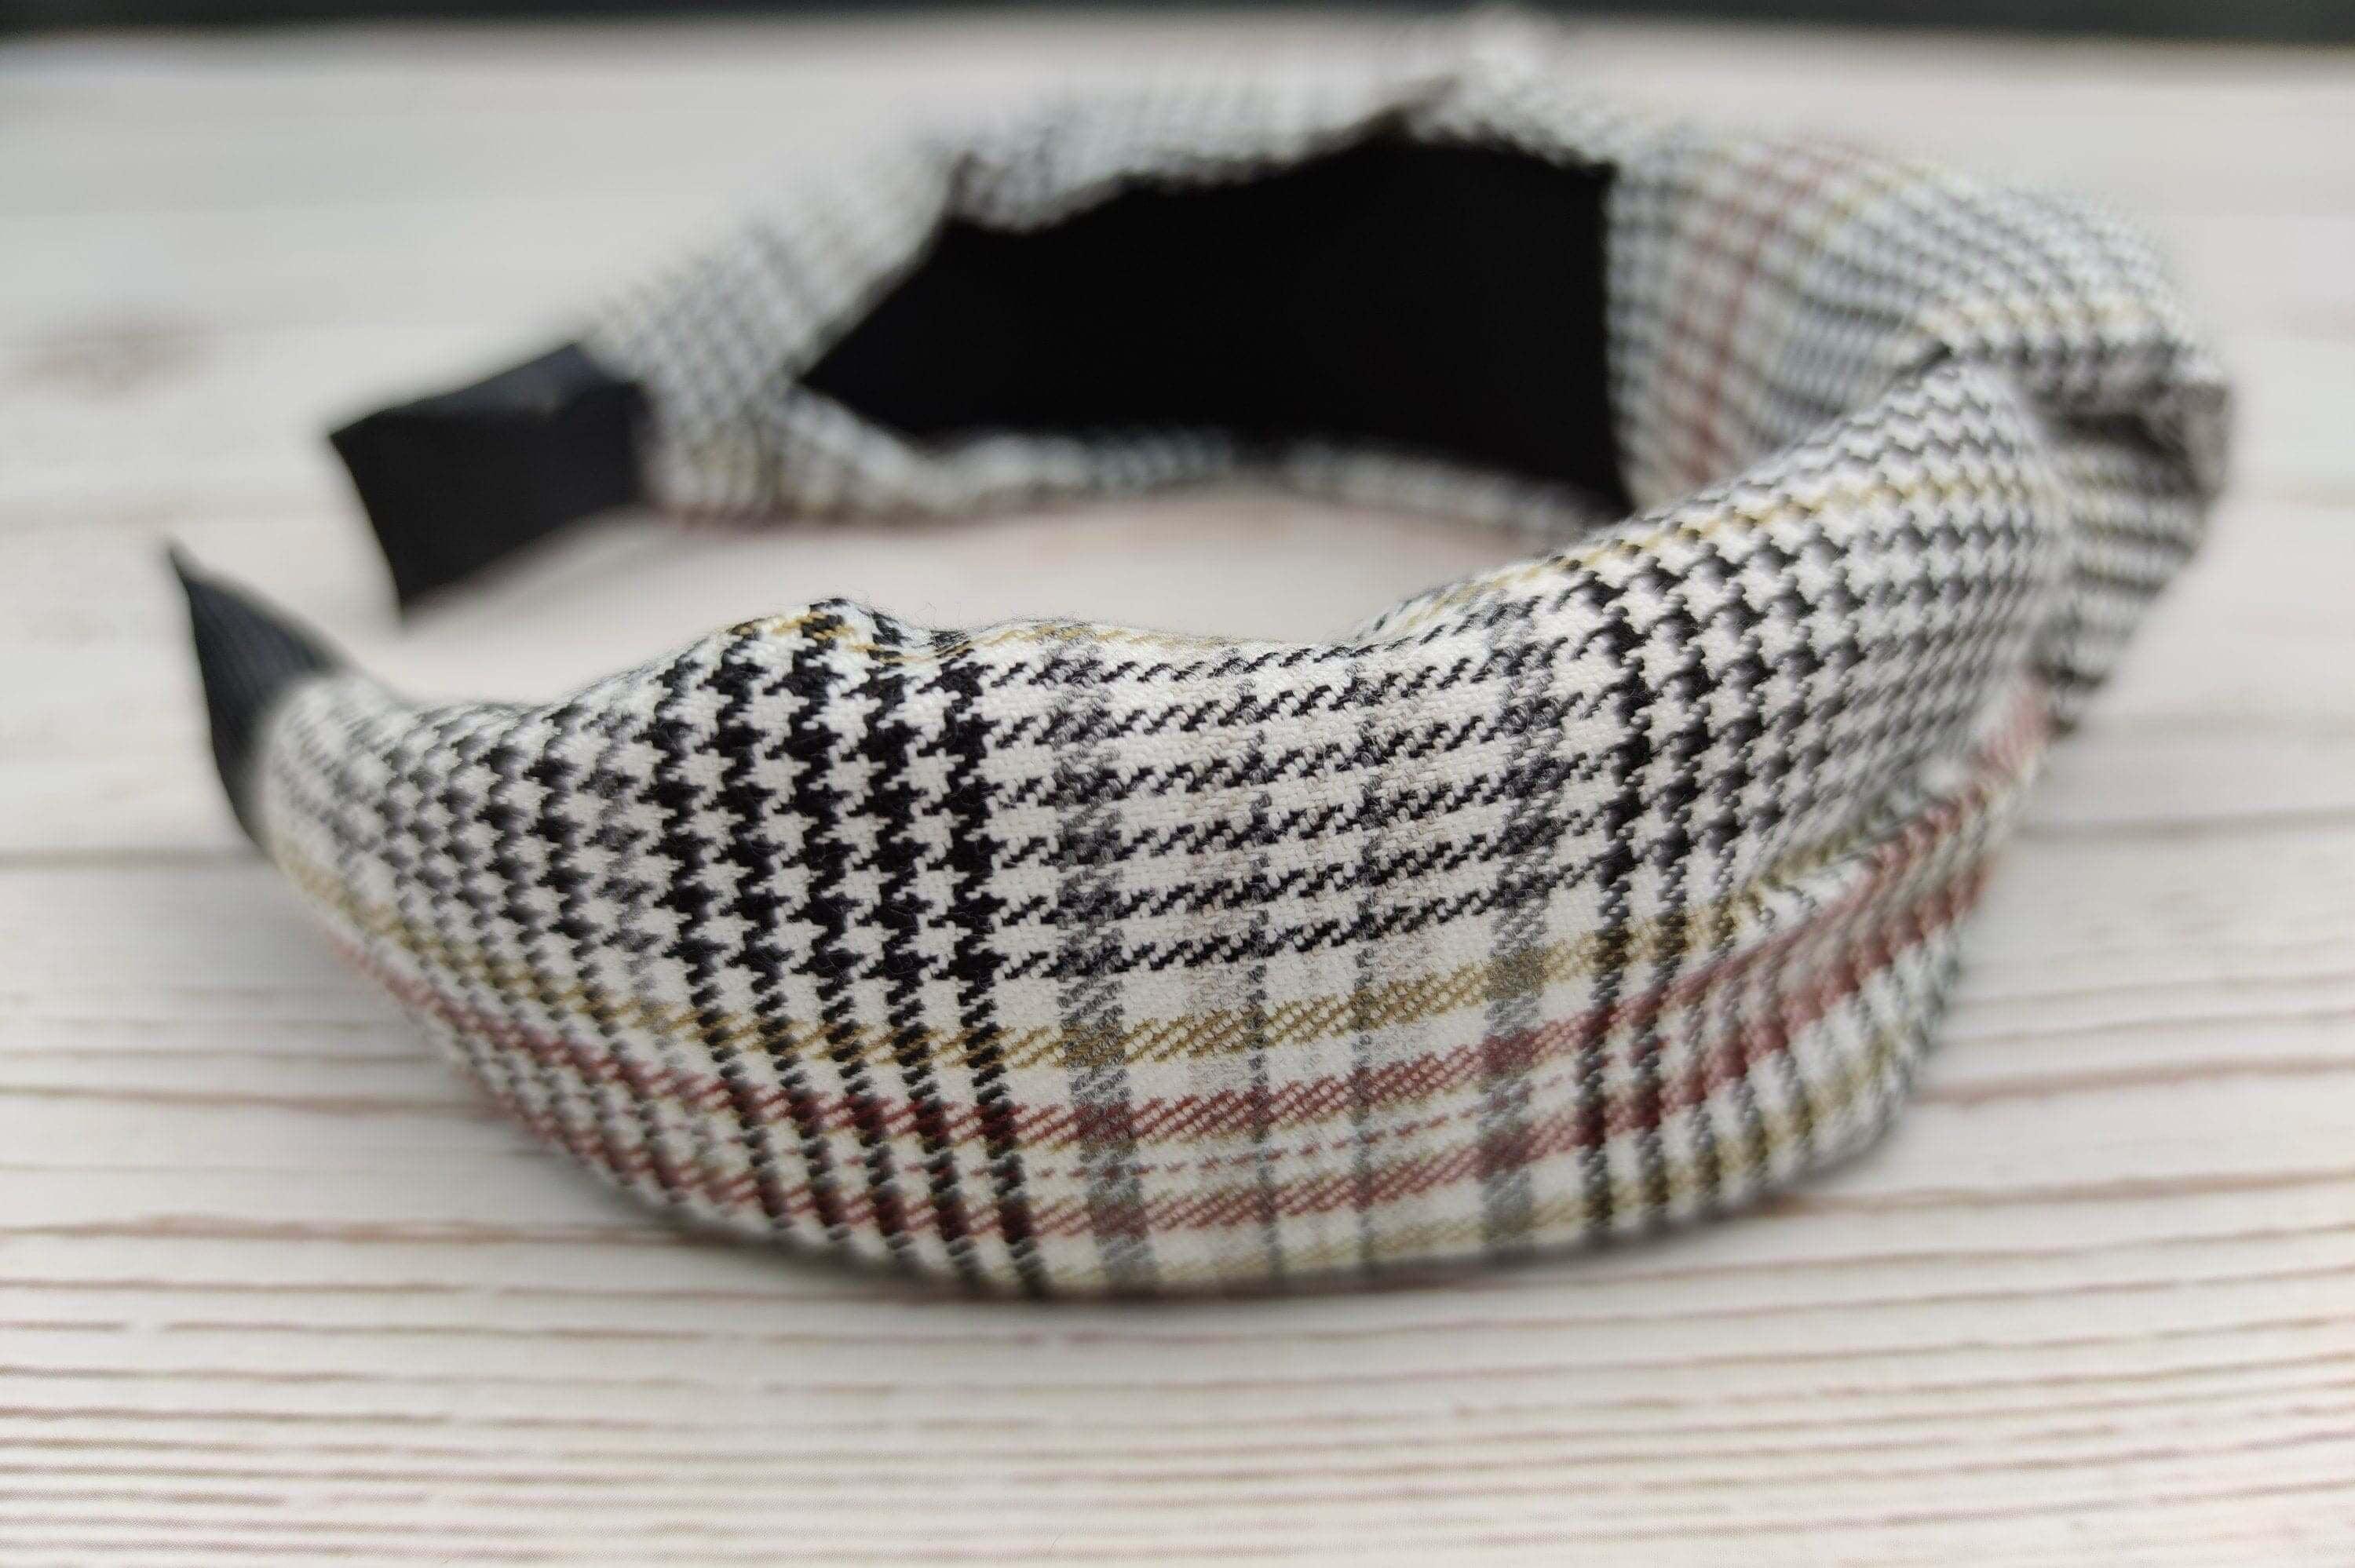 High-Quality White and Black Crepe Knotted Headband - Casual Fashion Houndstooth Hairband for College with Yellow Brown Striped Accents available at Moyoni Design